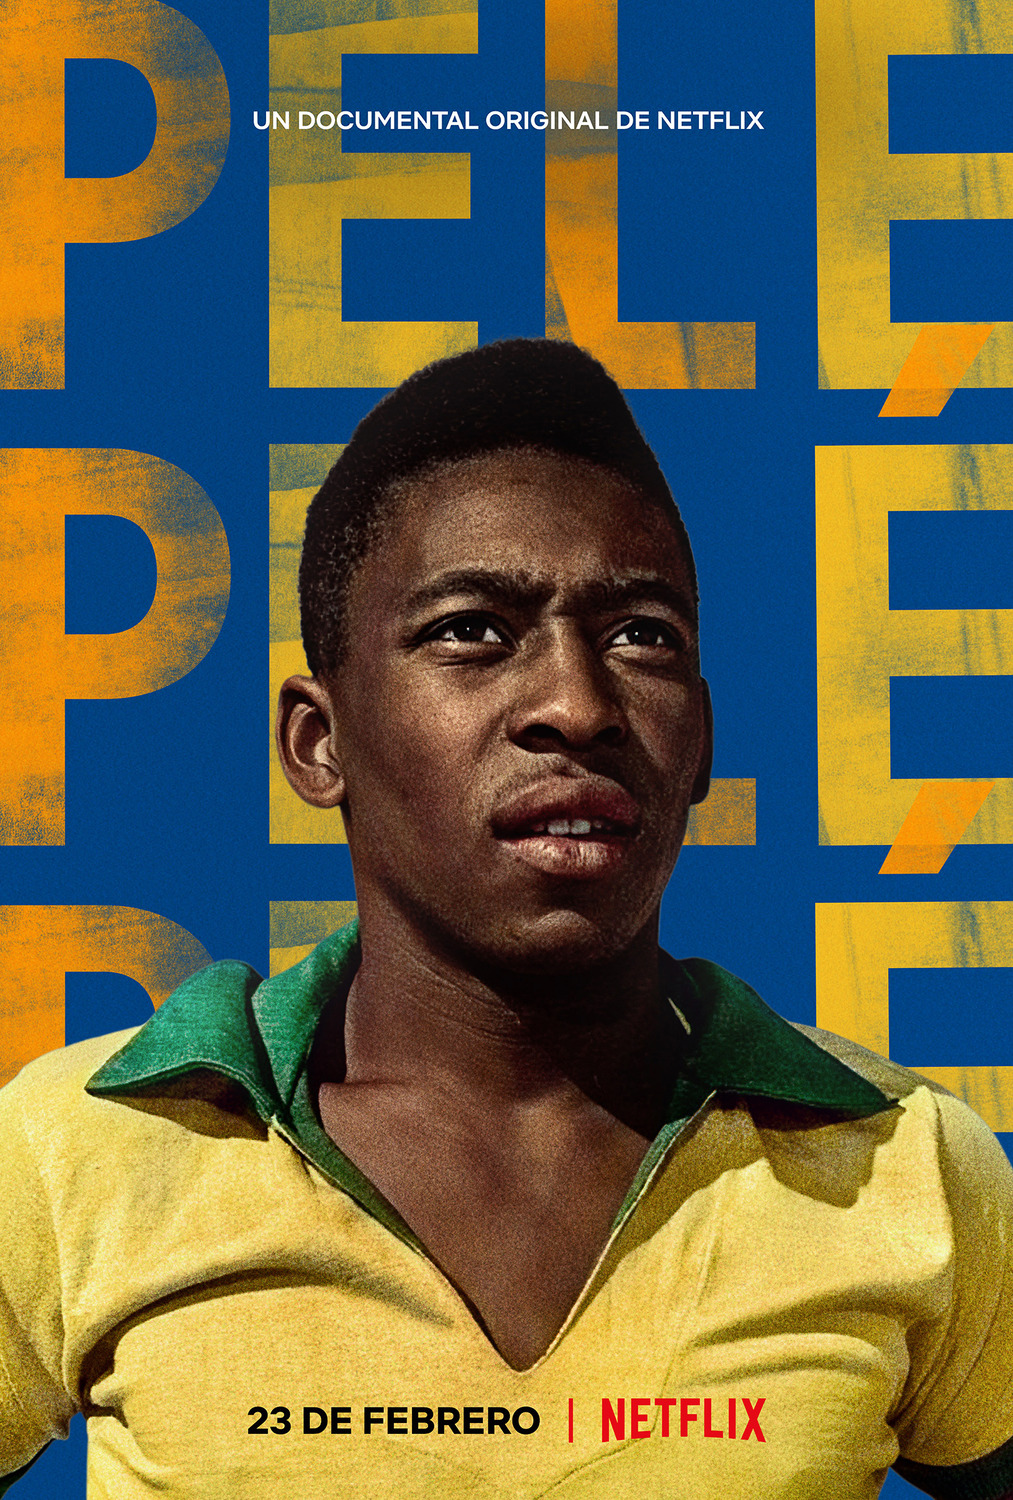 Extra Large Movie Poster Image for Pelé (#2 of 2)